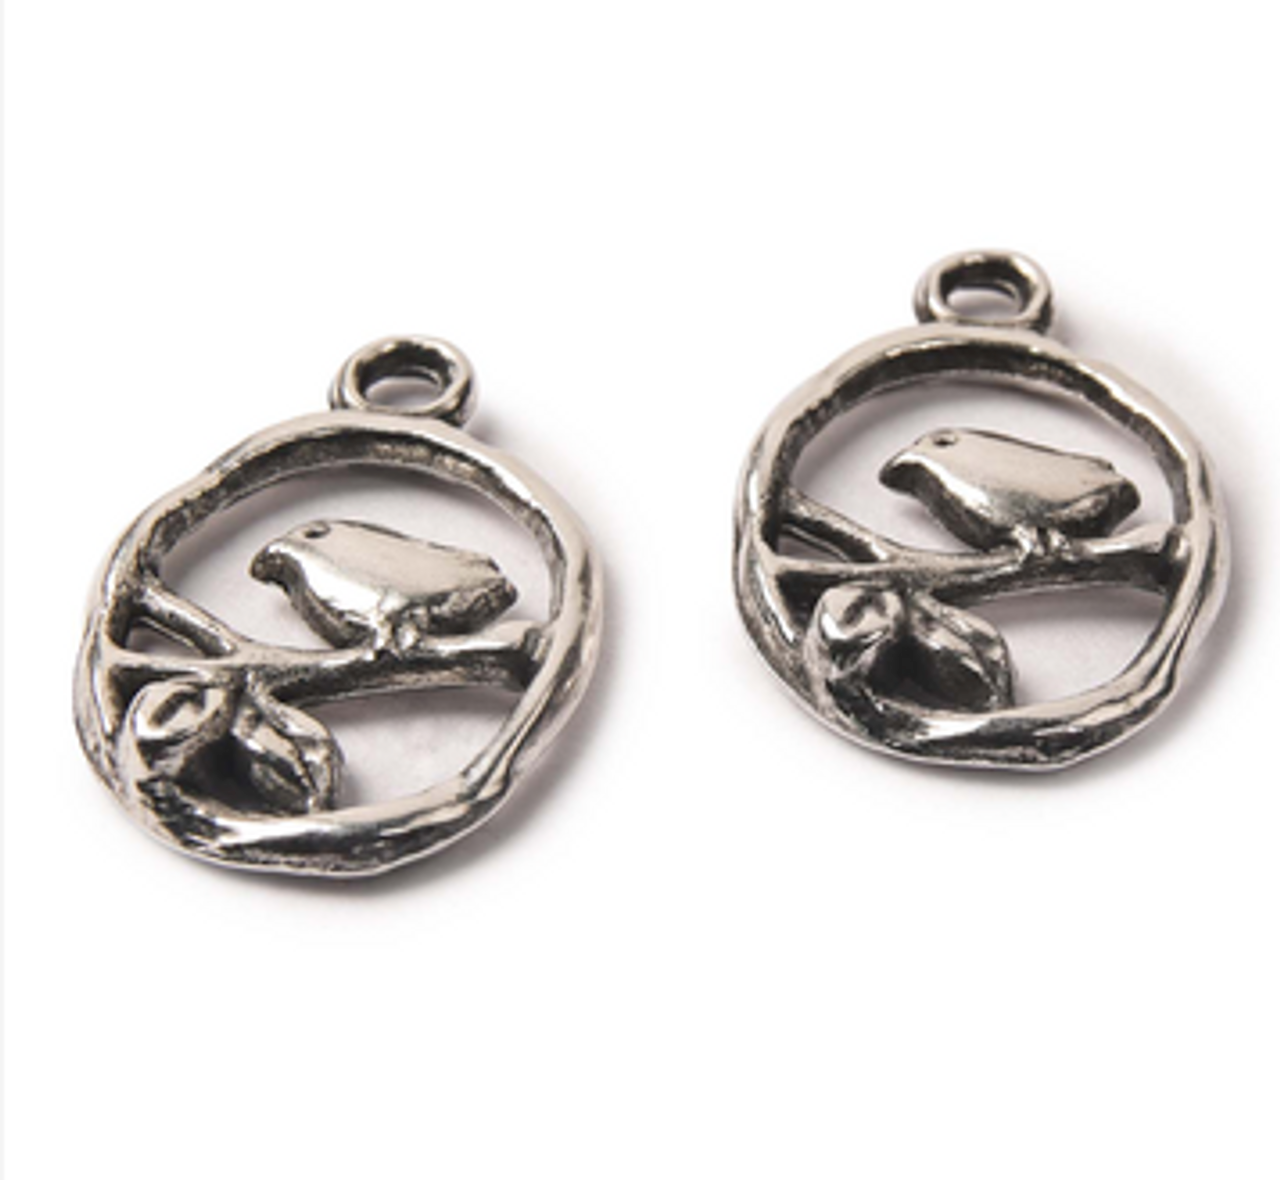 12x15mm Bird on Branch Charms (2pk) Athenacast Silver Plated